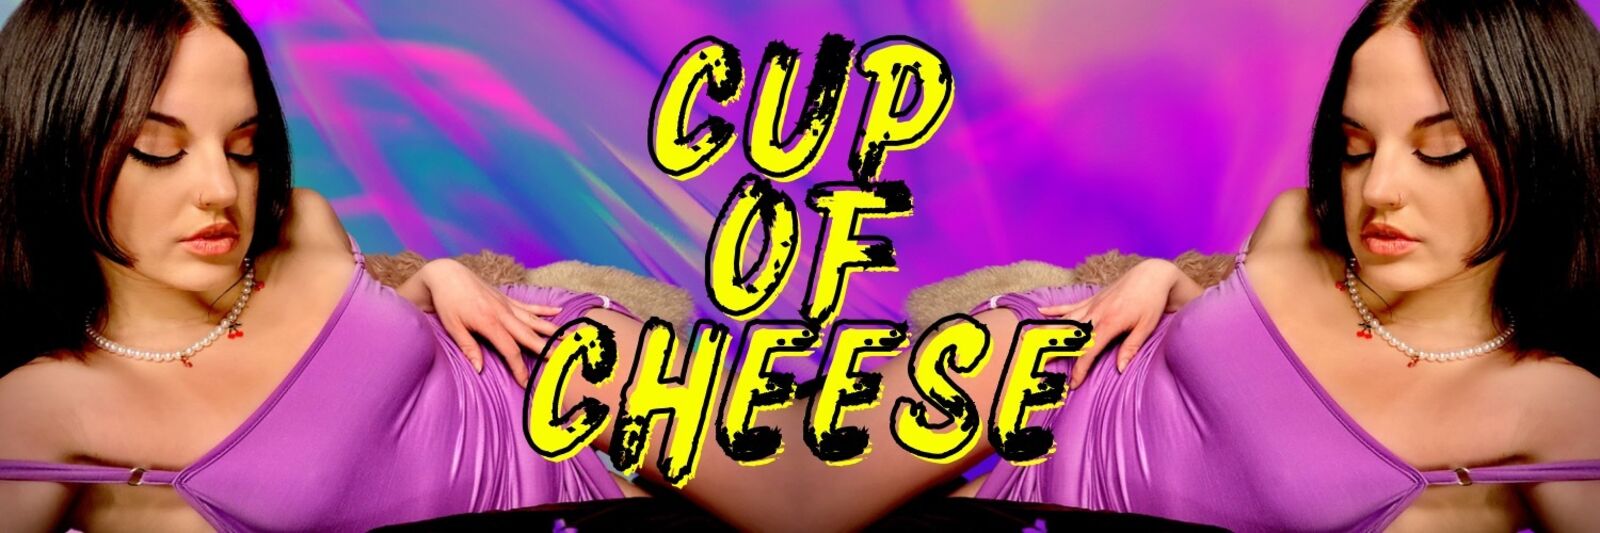 See Cup of Cheese - Fart Fetish Content profile